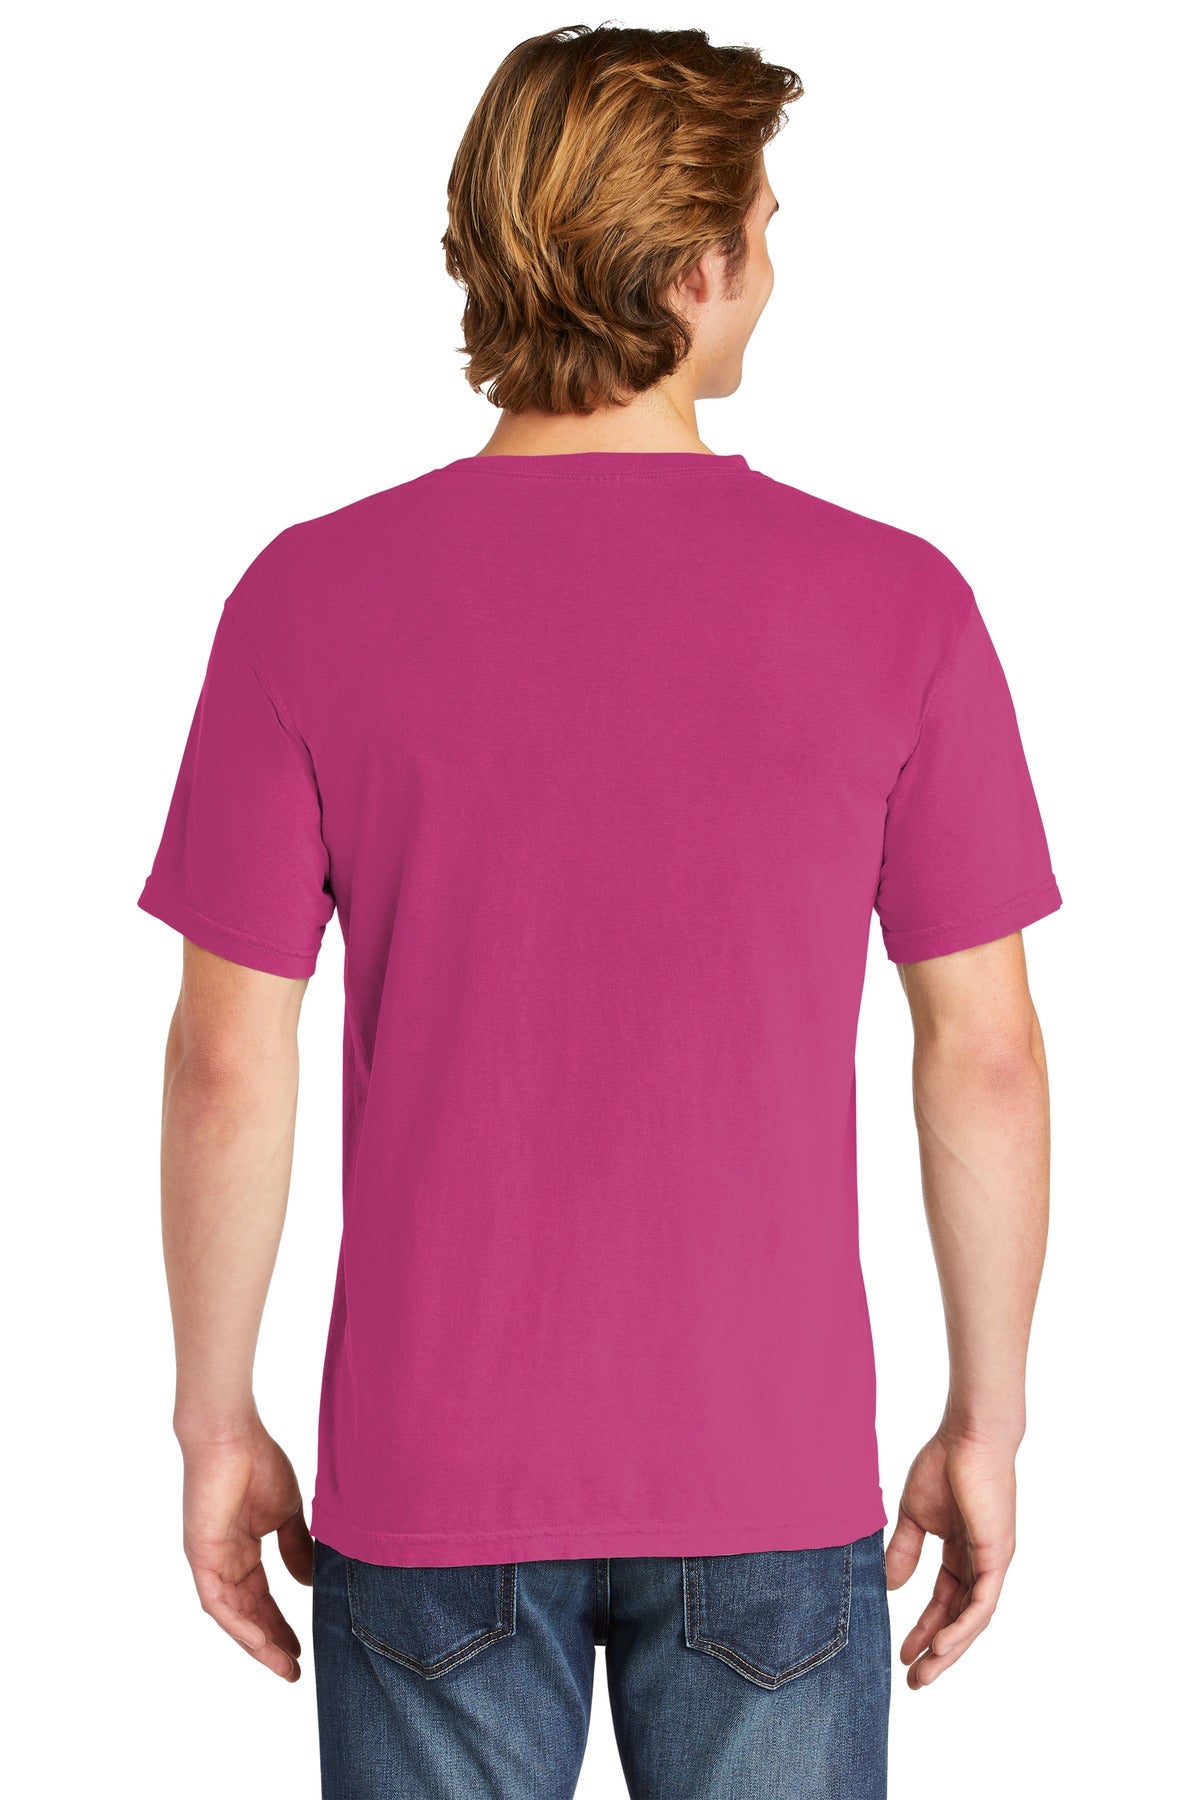 COMFORT COLORS ® Heavyweight Ring Spun Tee. 1717 [Heliconia] - DFW Impression